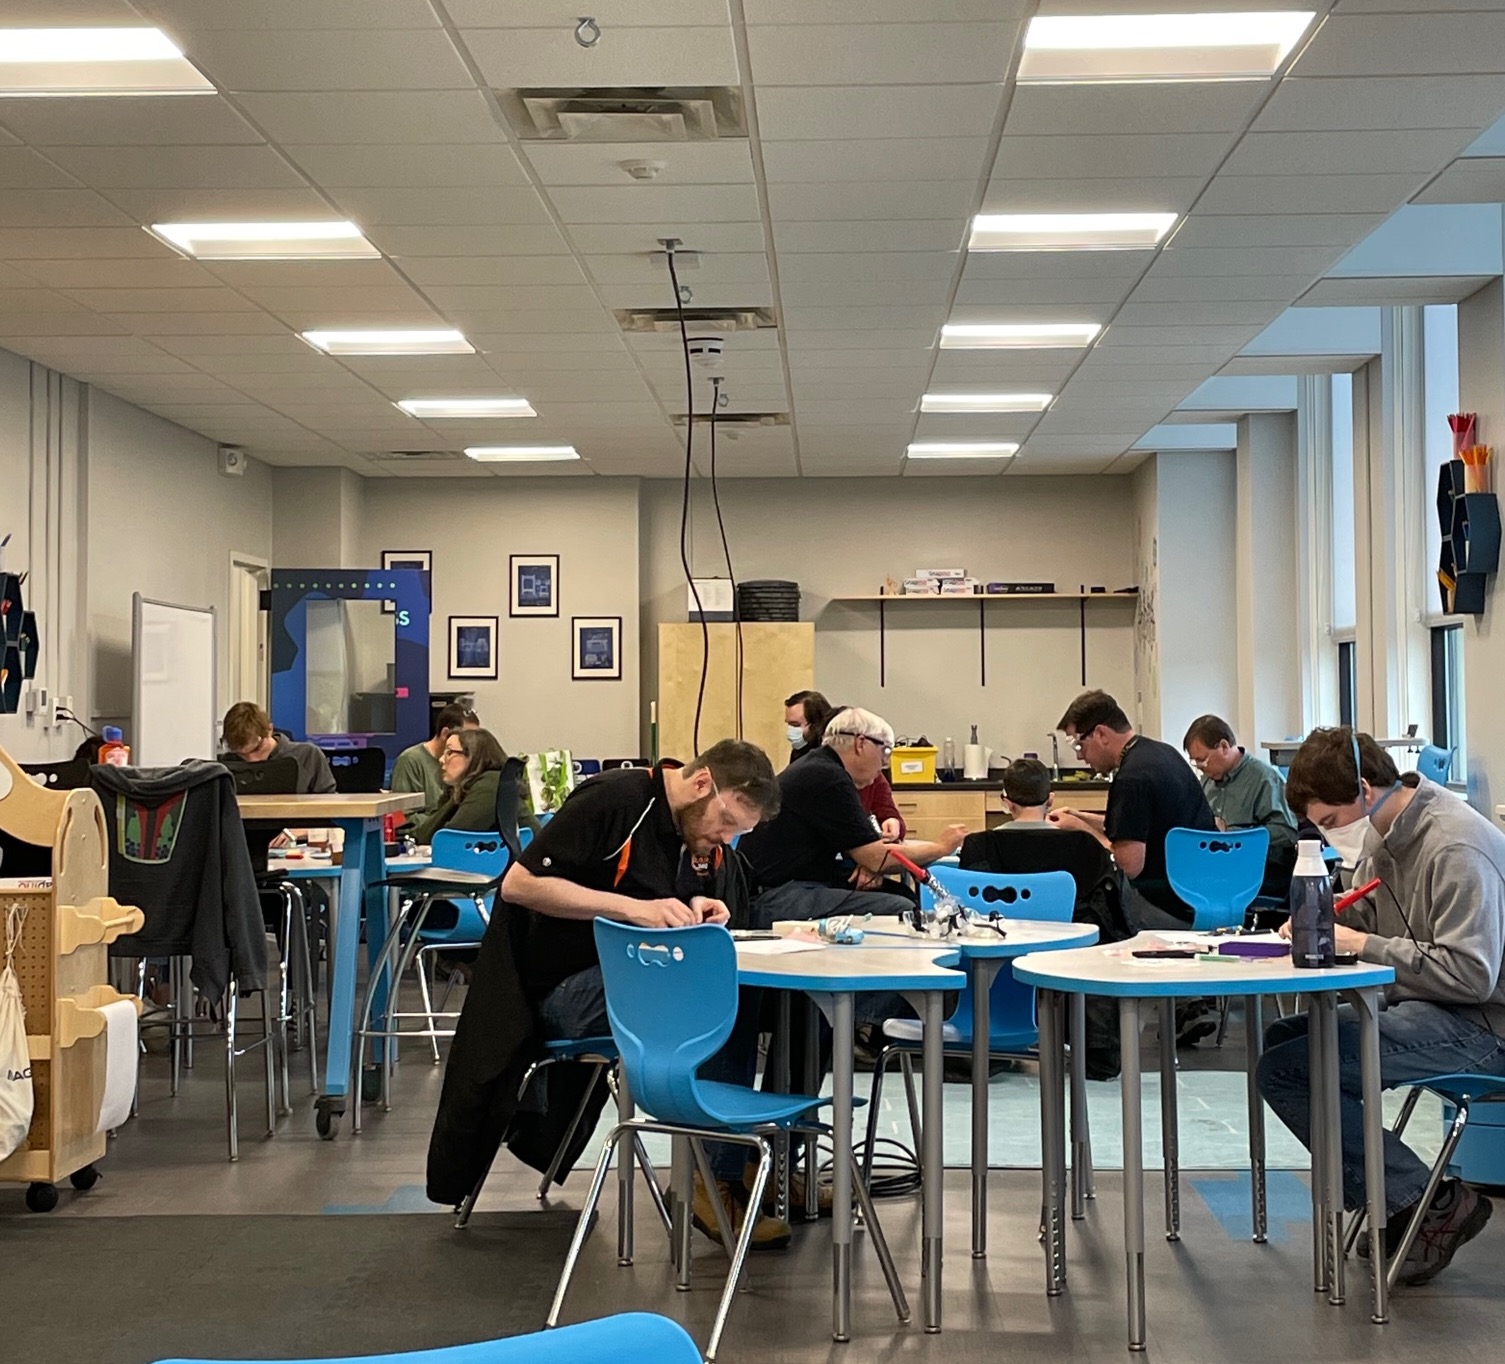 A room full of round white table and blue chairs with around ten people soldering during a soldering workshop.